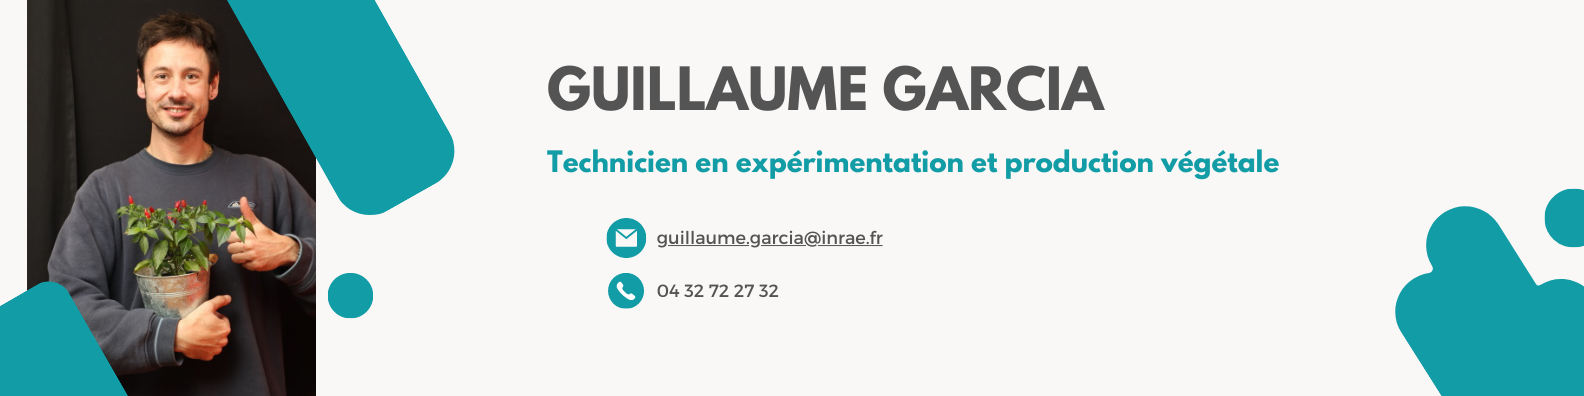 Guillaume Garcia.png